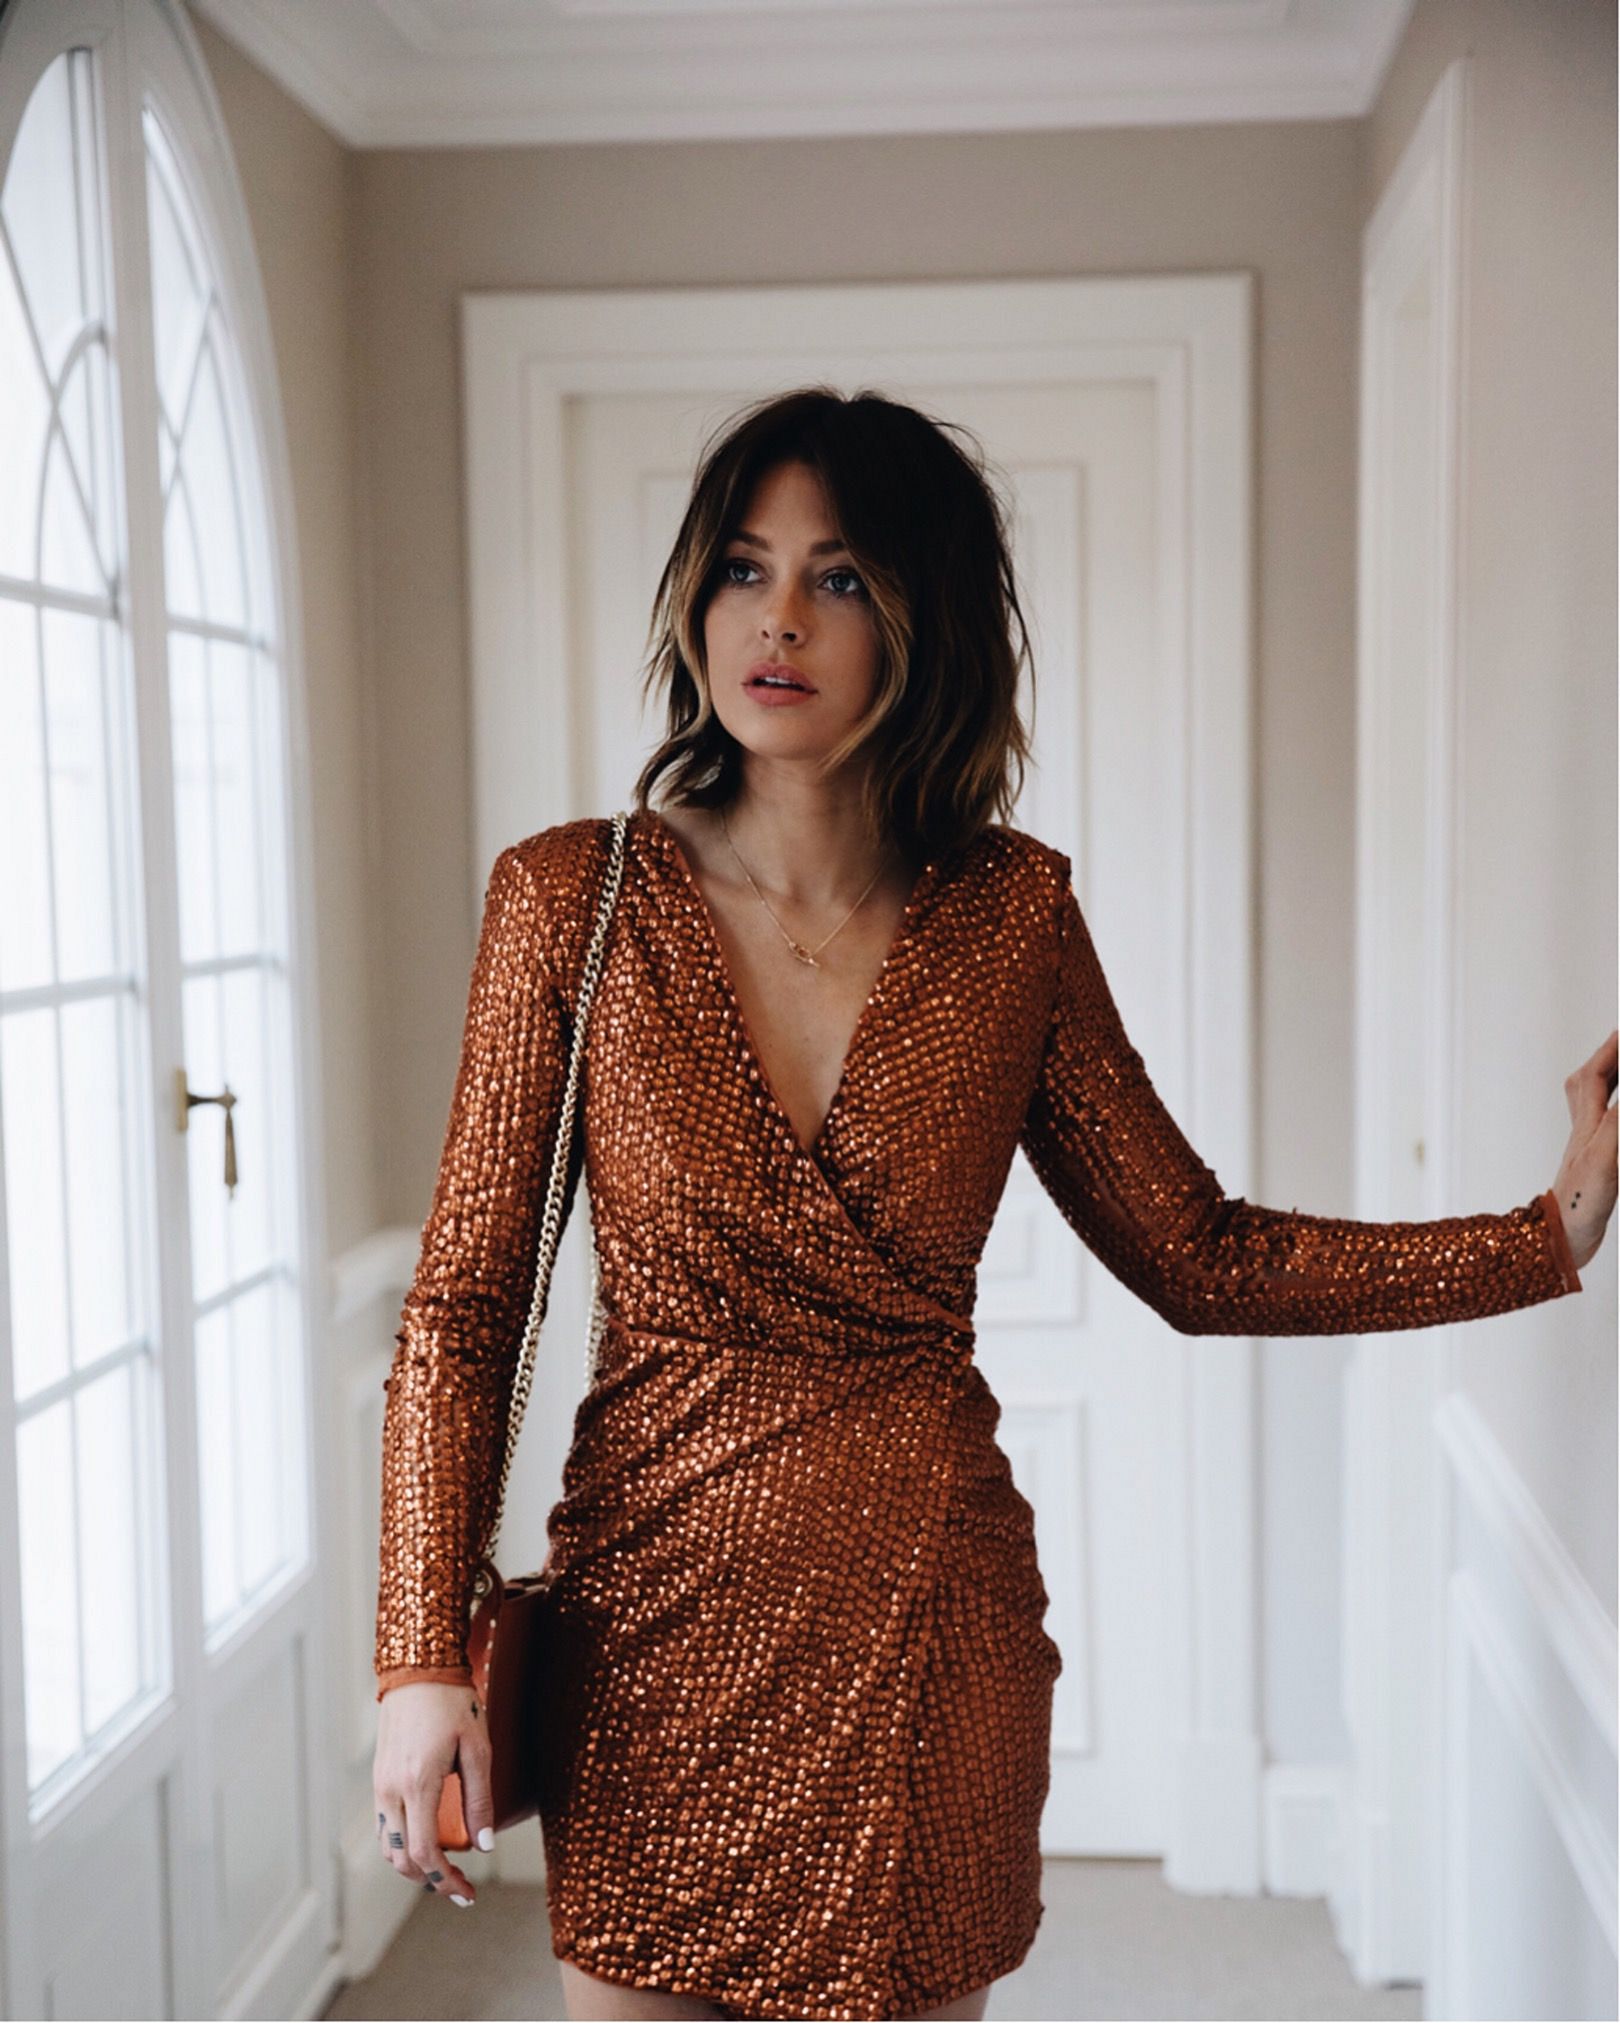 Copper sequined dress from missguided